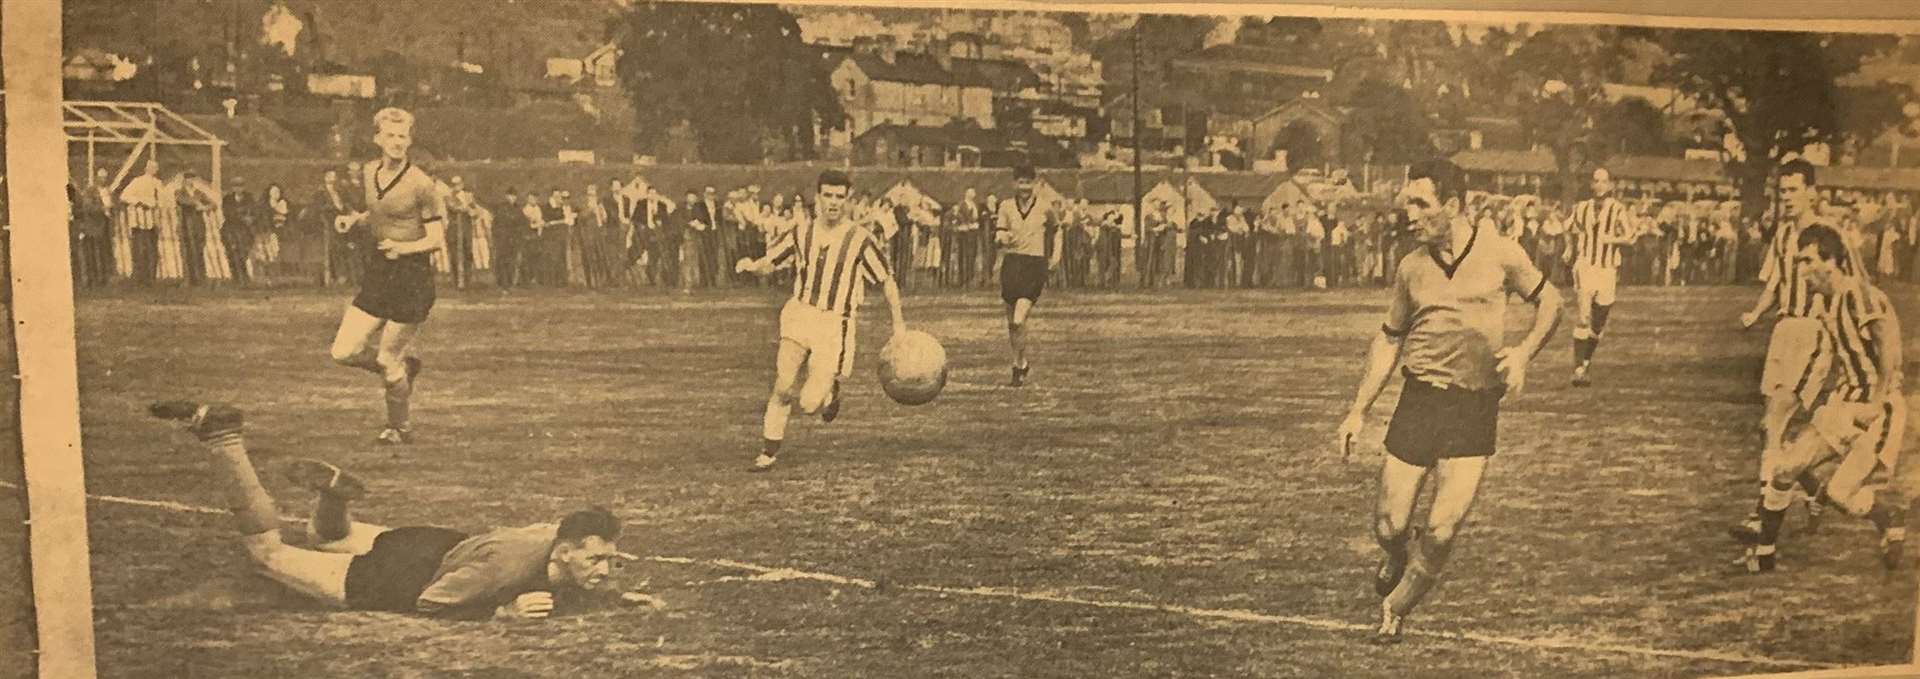 Action from the Tunbridge Wells v Maidstone Utd game in 1961